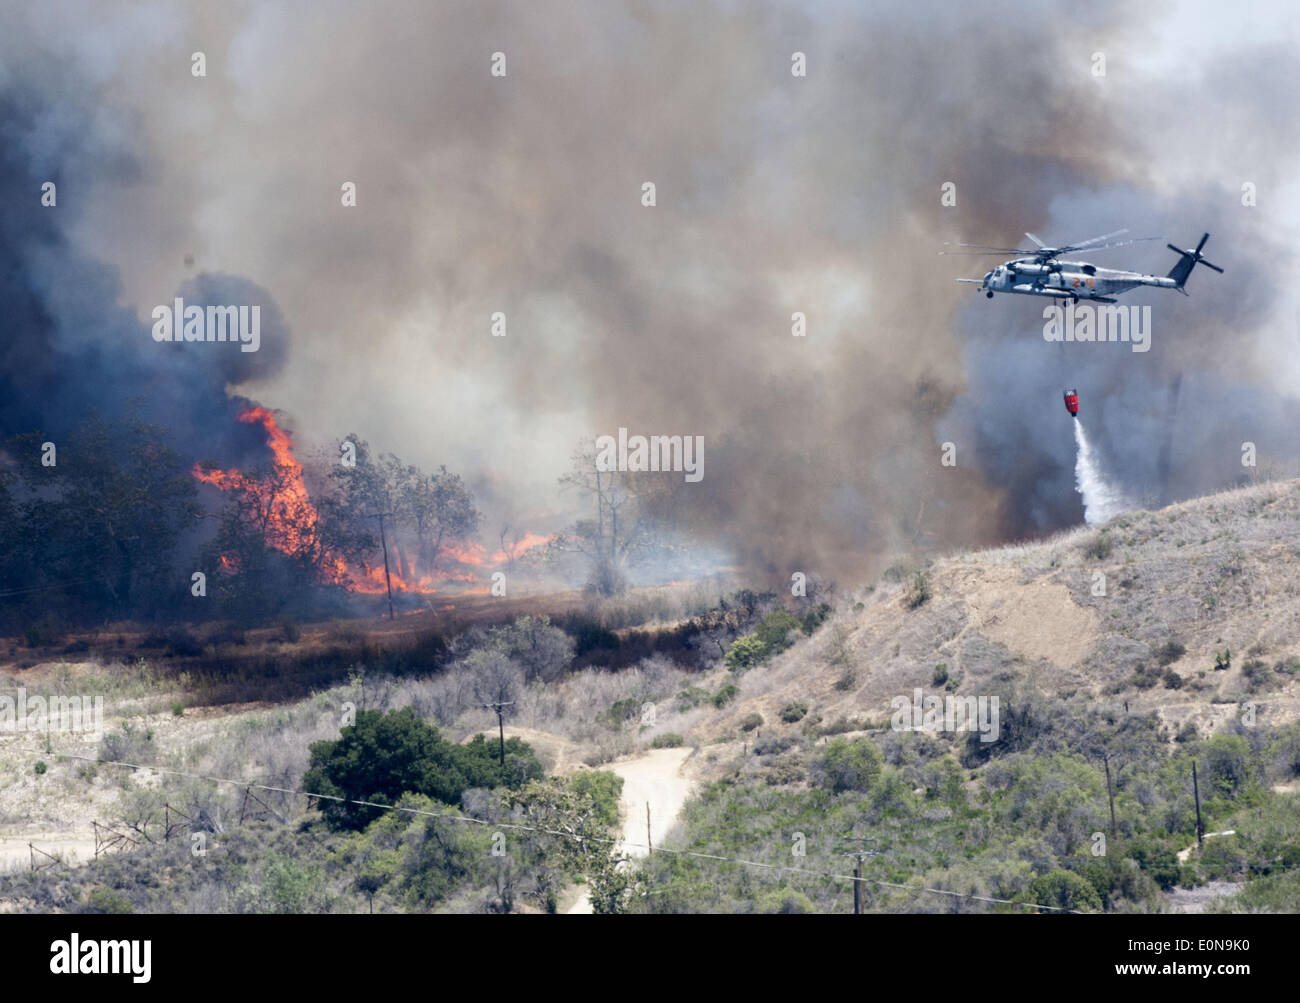 San Clemente, California, USA. 16th May, 2014. A Navy helicopter drops water on the fire line at the Talega Fire on Friday. © David Bro/ZUMAPRESS. Credit:  ZUMA Press, Inc./Alamy Live News Stock Photo